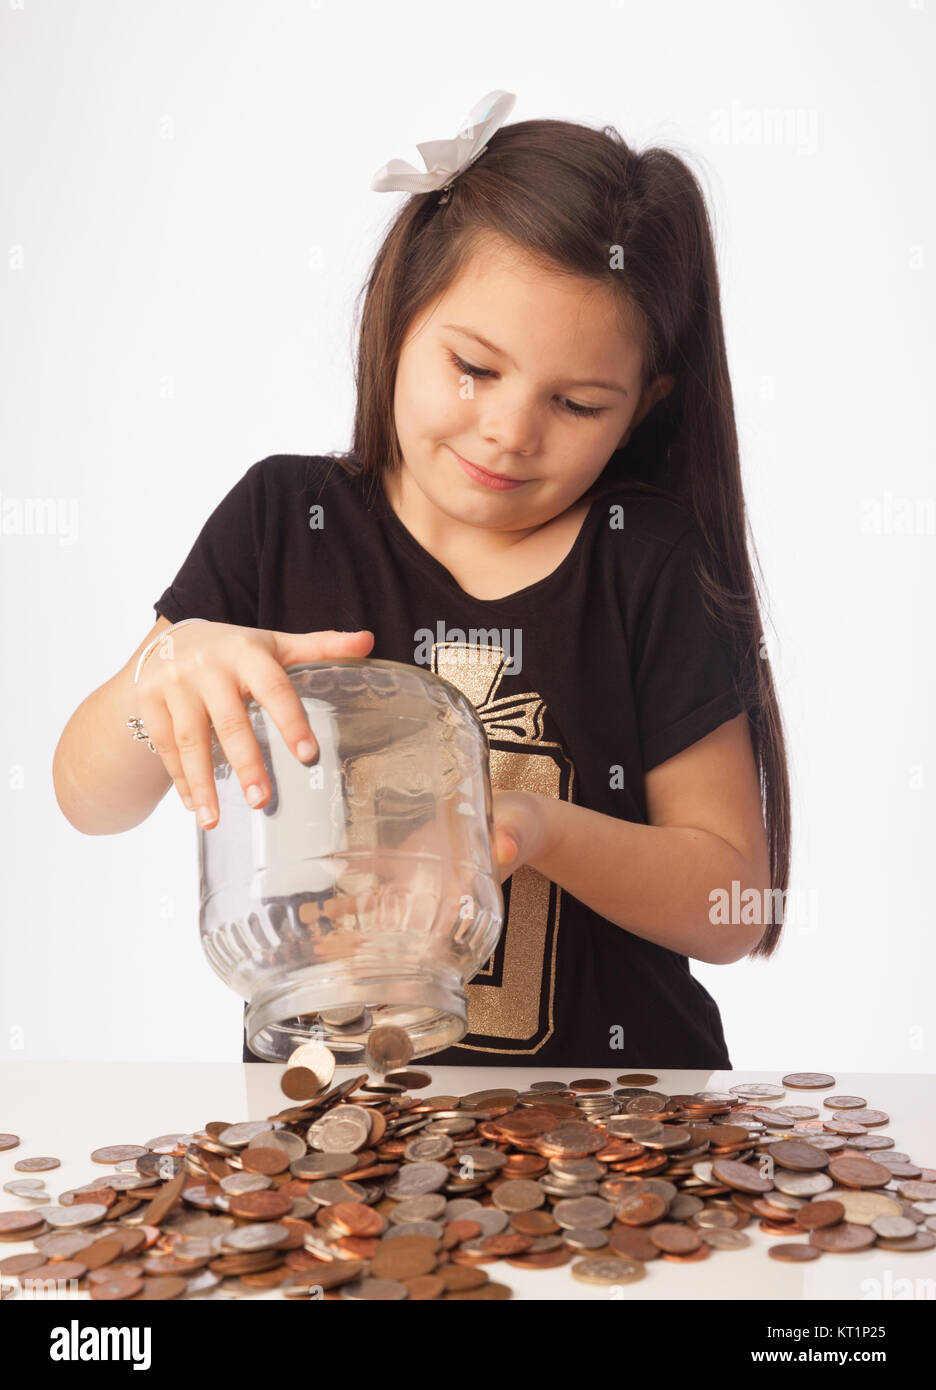 Seven year old girl tipping her savings jar full of coins onto  the desk. Stock Photo